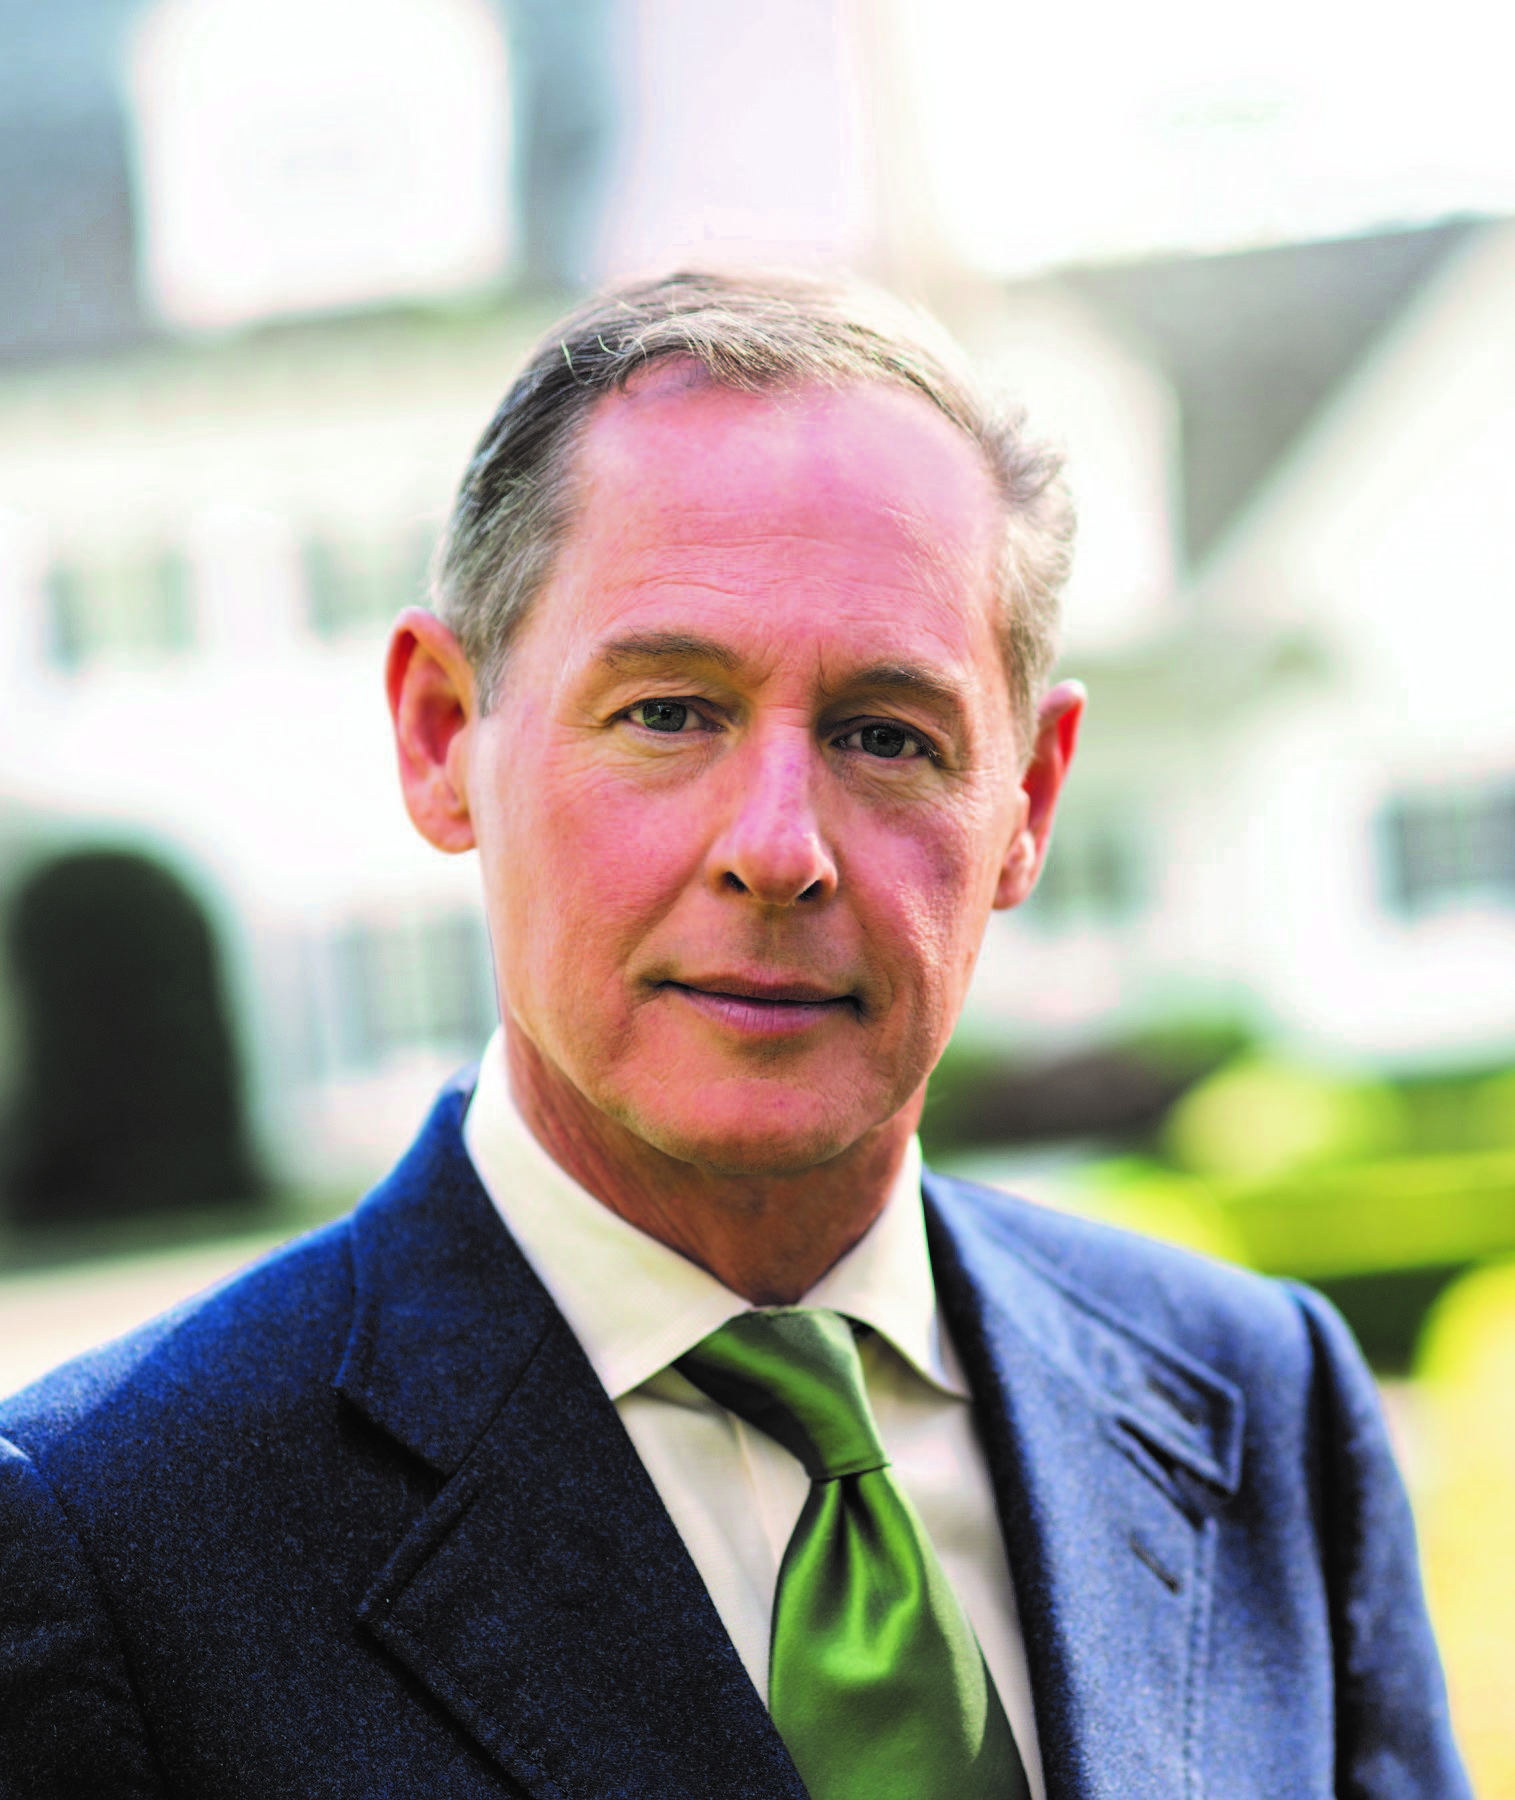 Saturday morning, December 5th, award-winning interior designer Richard Keith Langham, whose client list varies from the late Jacqueline Kennedy Onassis to Hilary Swank, will be speaking at the Art & Antiques Show.